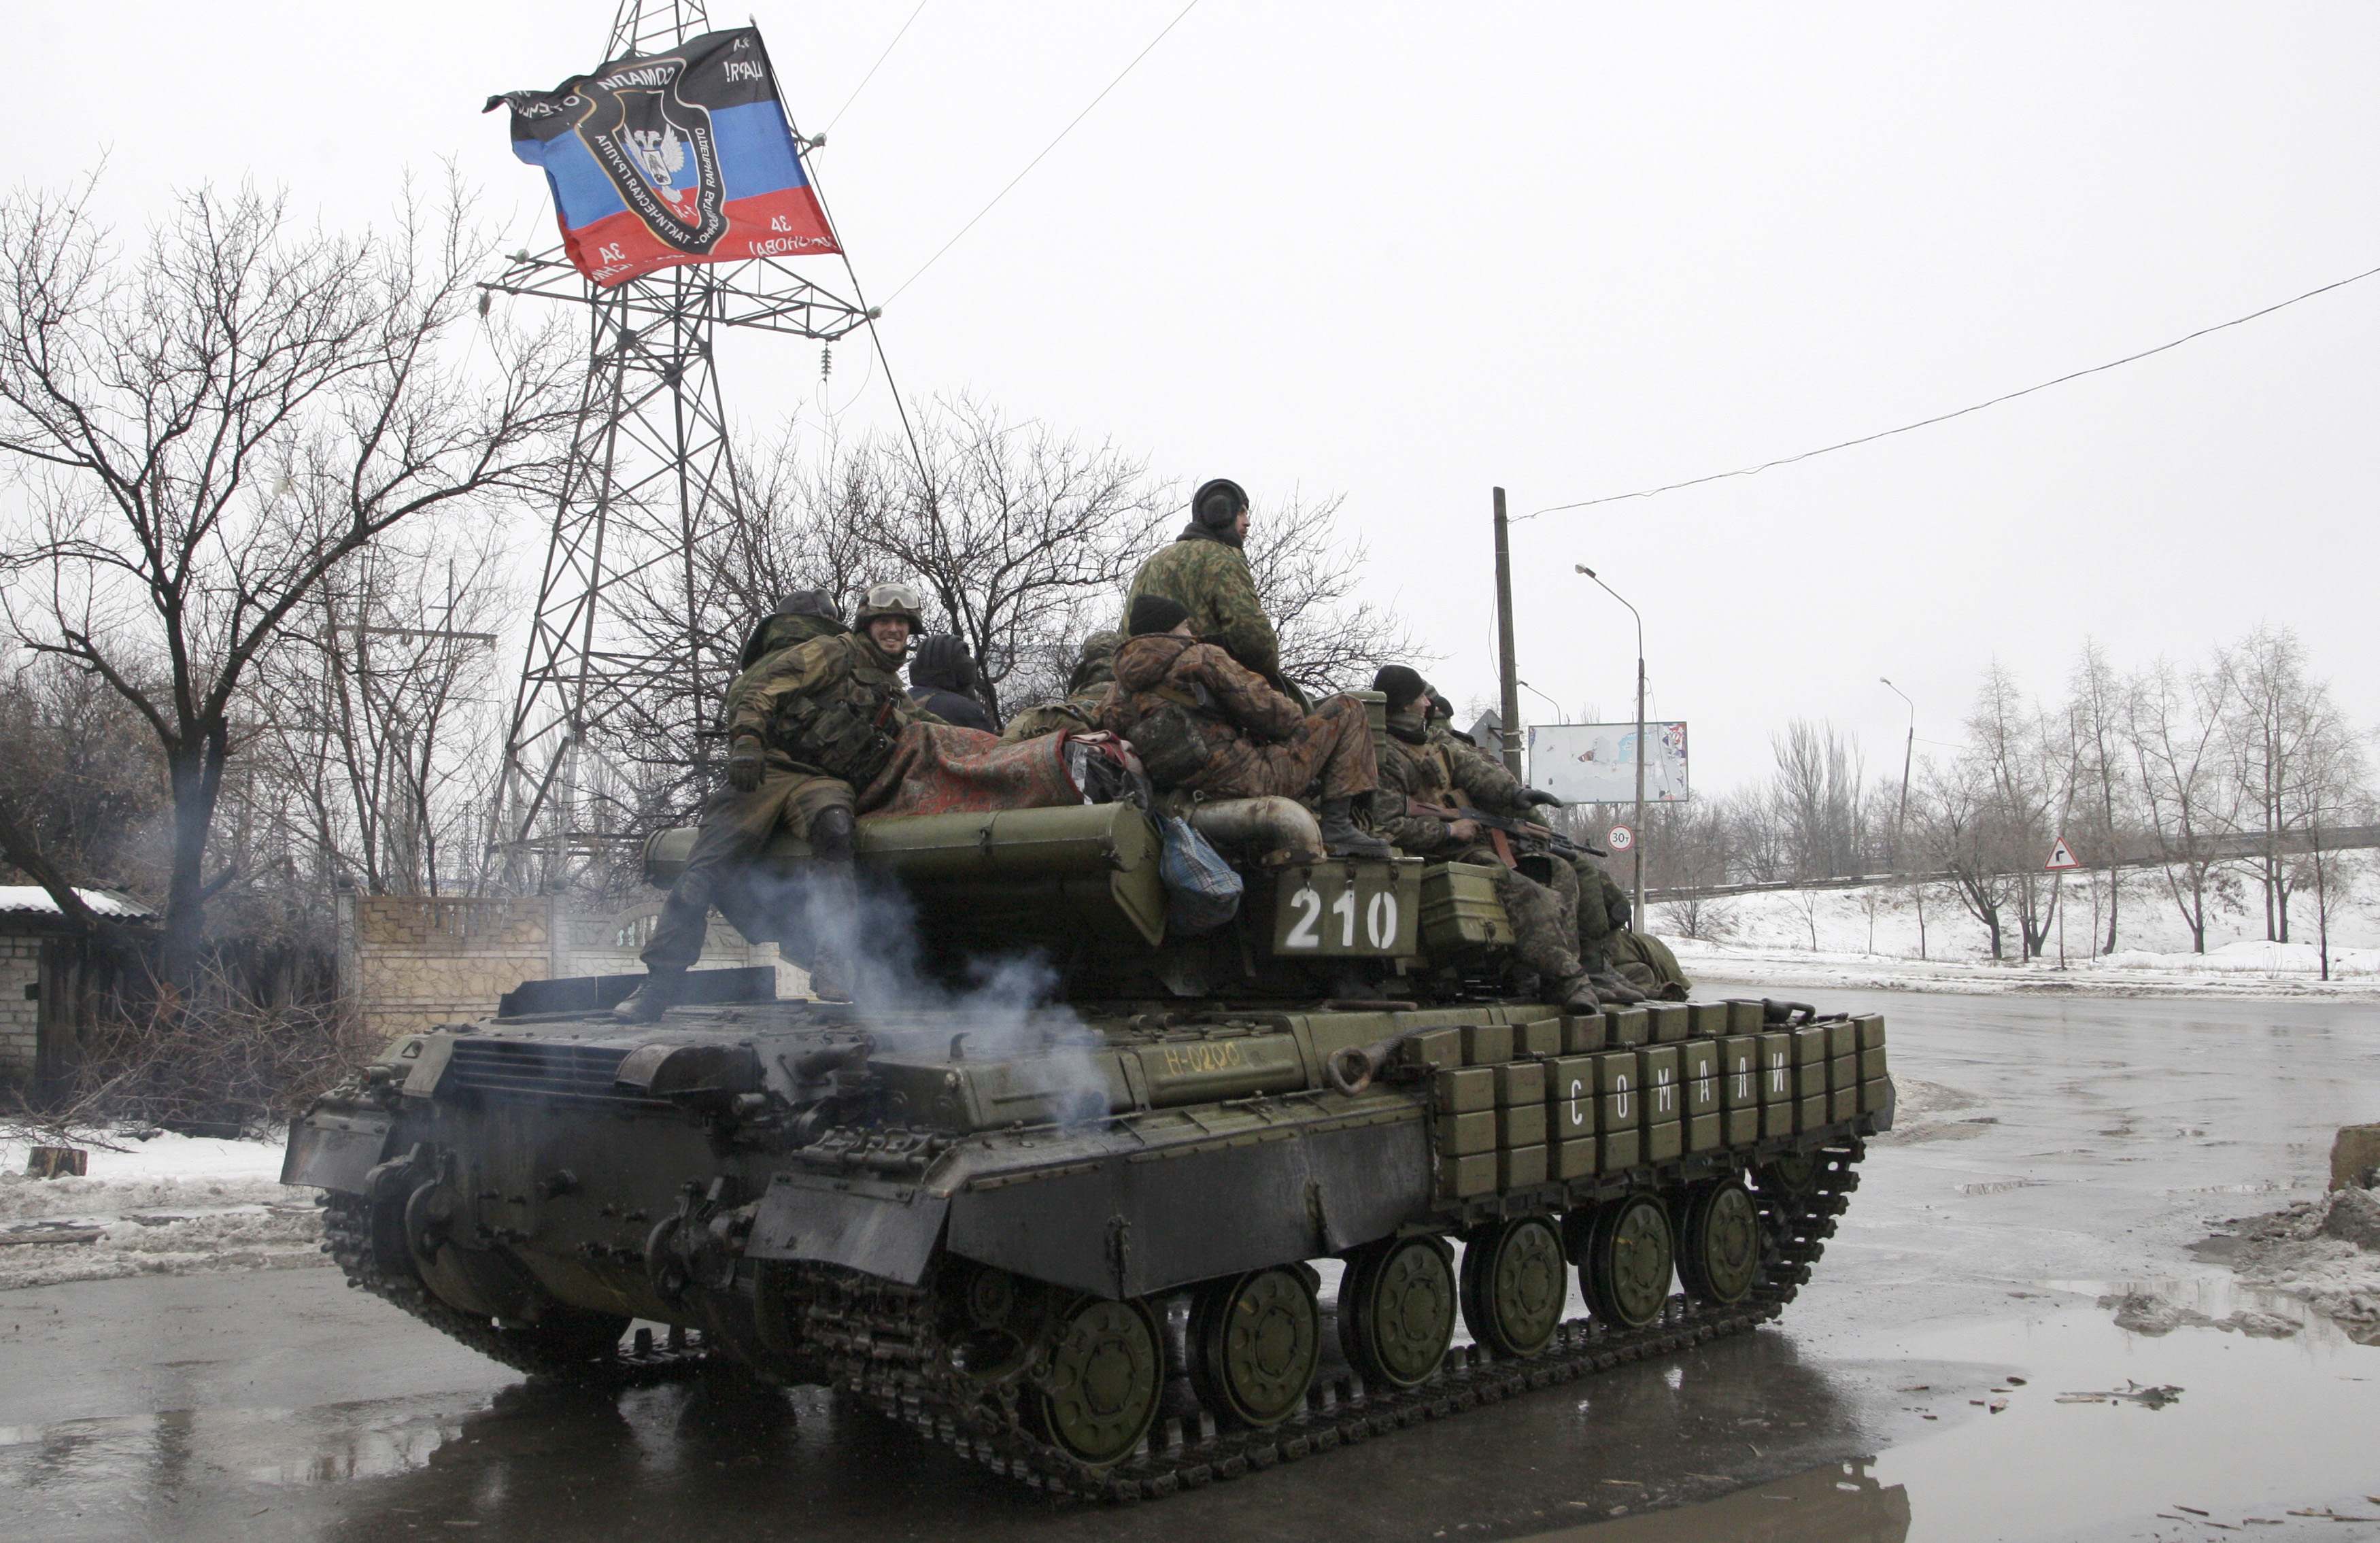 Members of the armed forces of the separatist self-proclaimed Donetsk People's Republic drive an armoured vehicle on the outskirts of Donetsk